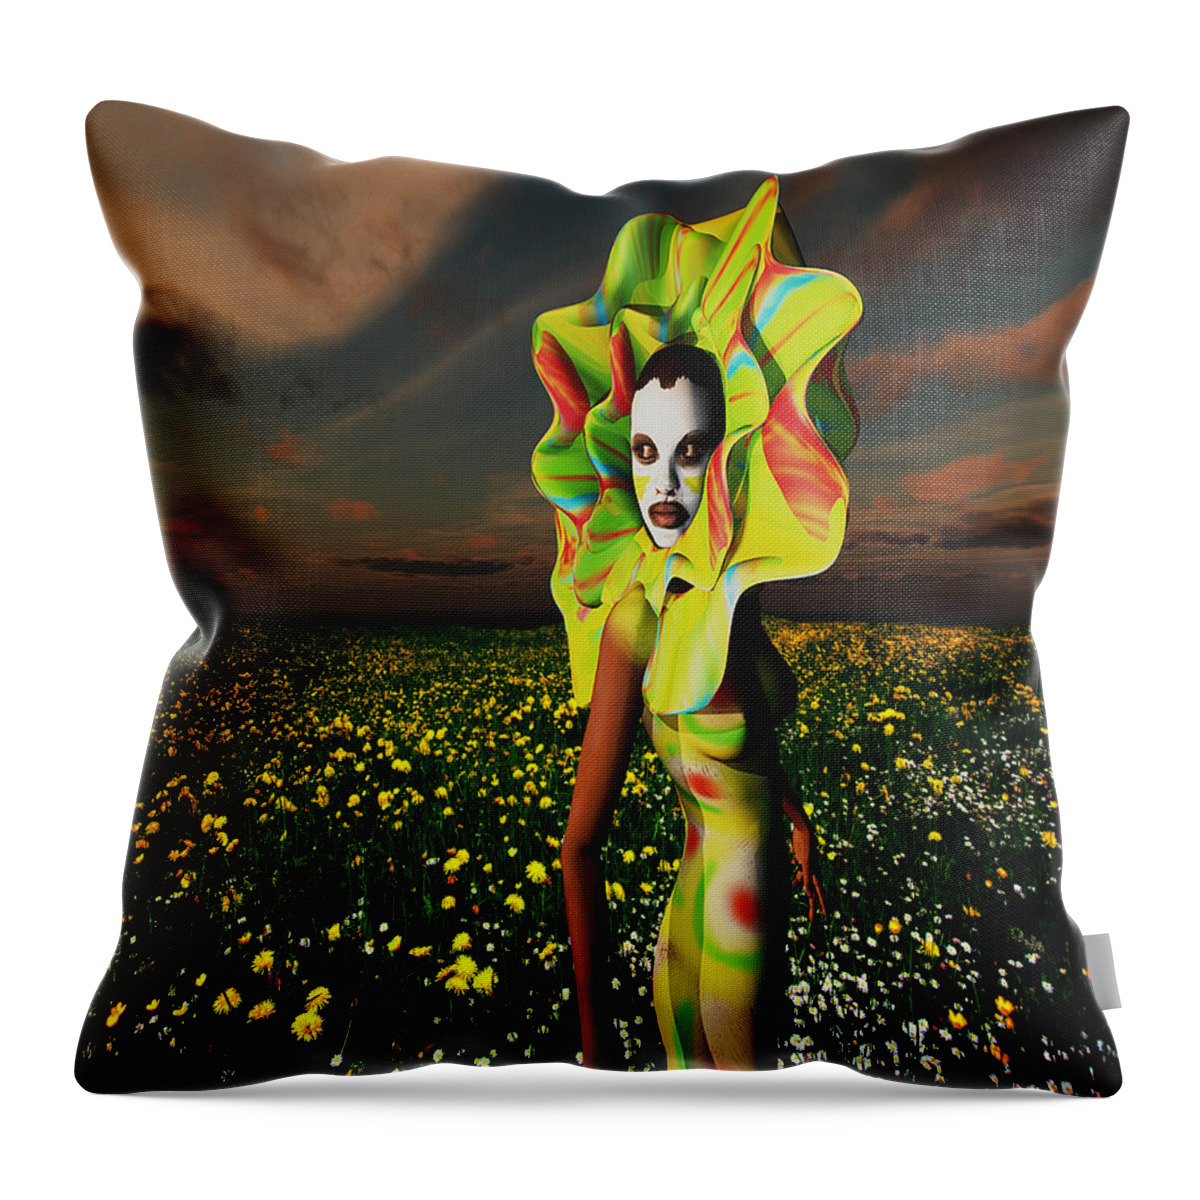 Yellow Begonia Throw Pillow featuring the digital art Yellow Begonia by Williem McWhorter